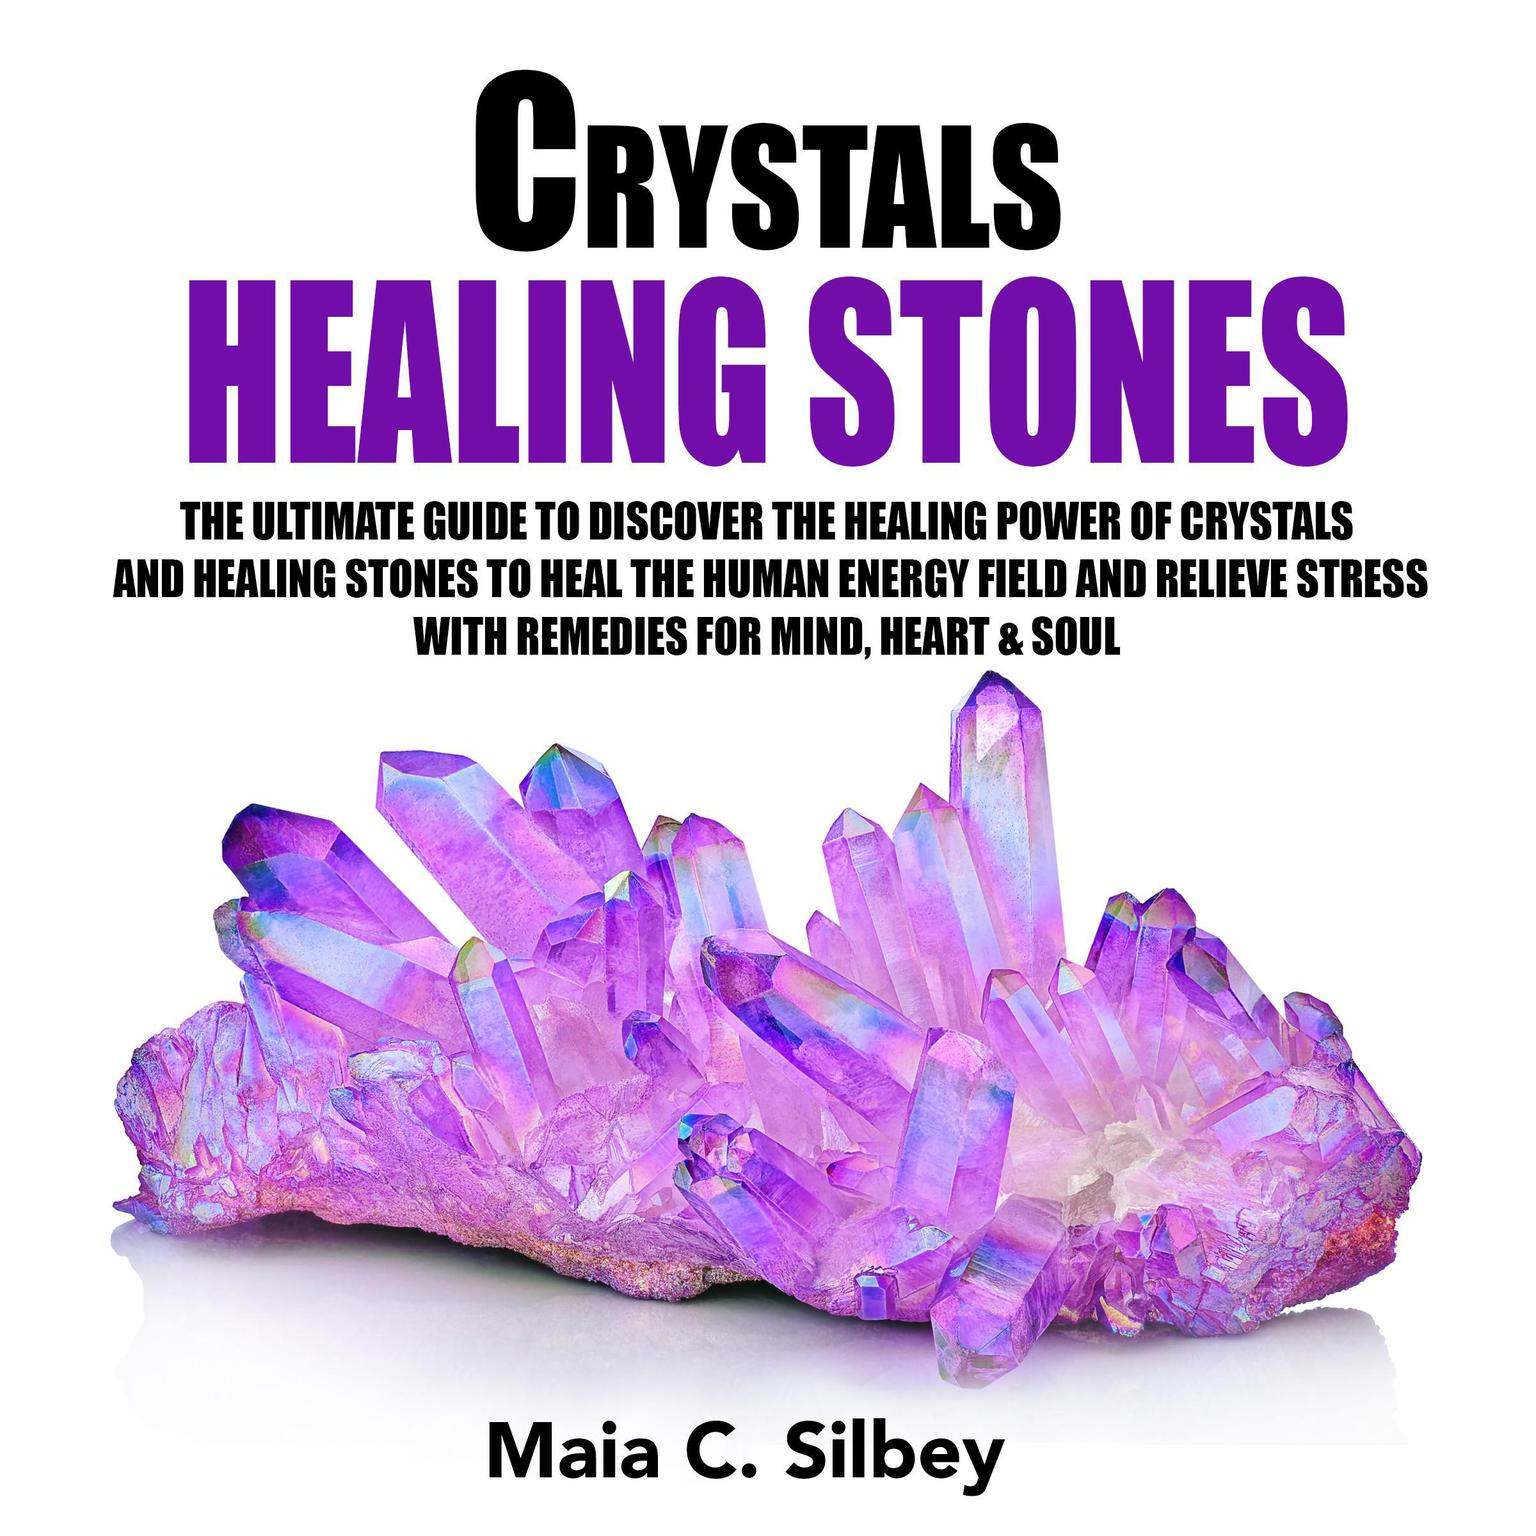 Crystals Healing Stones: The Ultimate Guide to Discover the Healing Power of Crystals and Healing Stones to Heal the Human Energy Field and Relieve Stress with Remedies for Mind, Heart & Soul Audiobook, by Maia C. Silbey